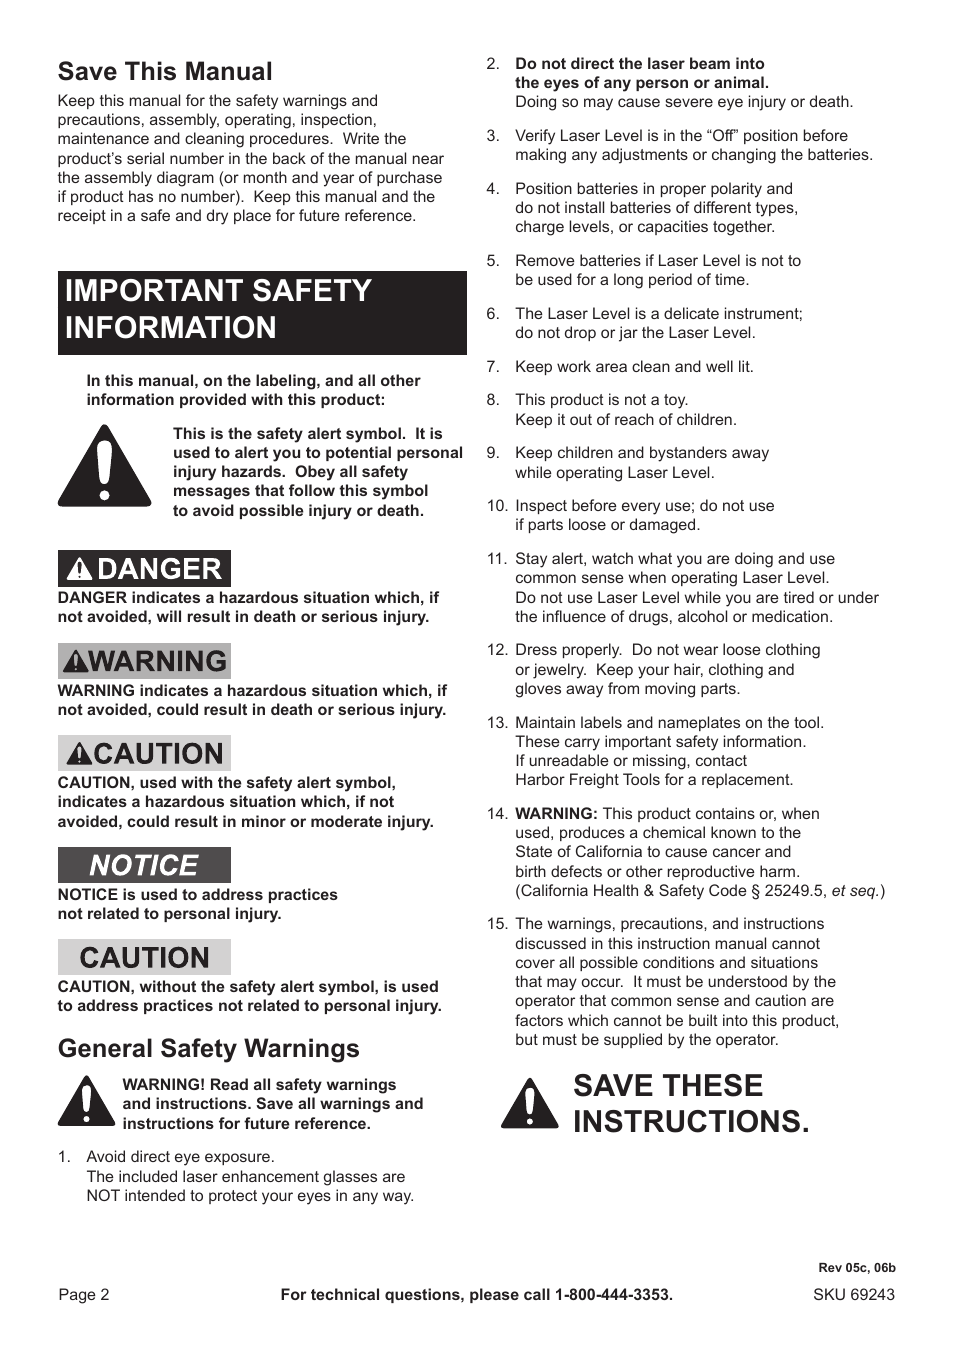 Important safety information, Save these instructions, Save this manual | Harbor  Freight Tools Pittsburgh Self-leveling Laser Level 69243 User Manual | Page  2 / 8